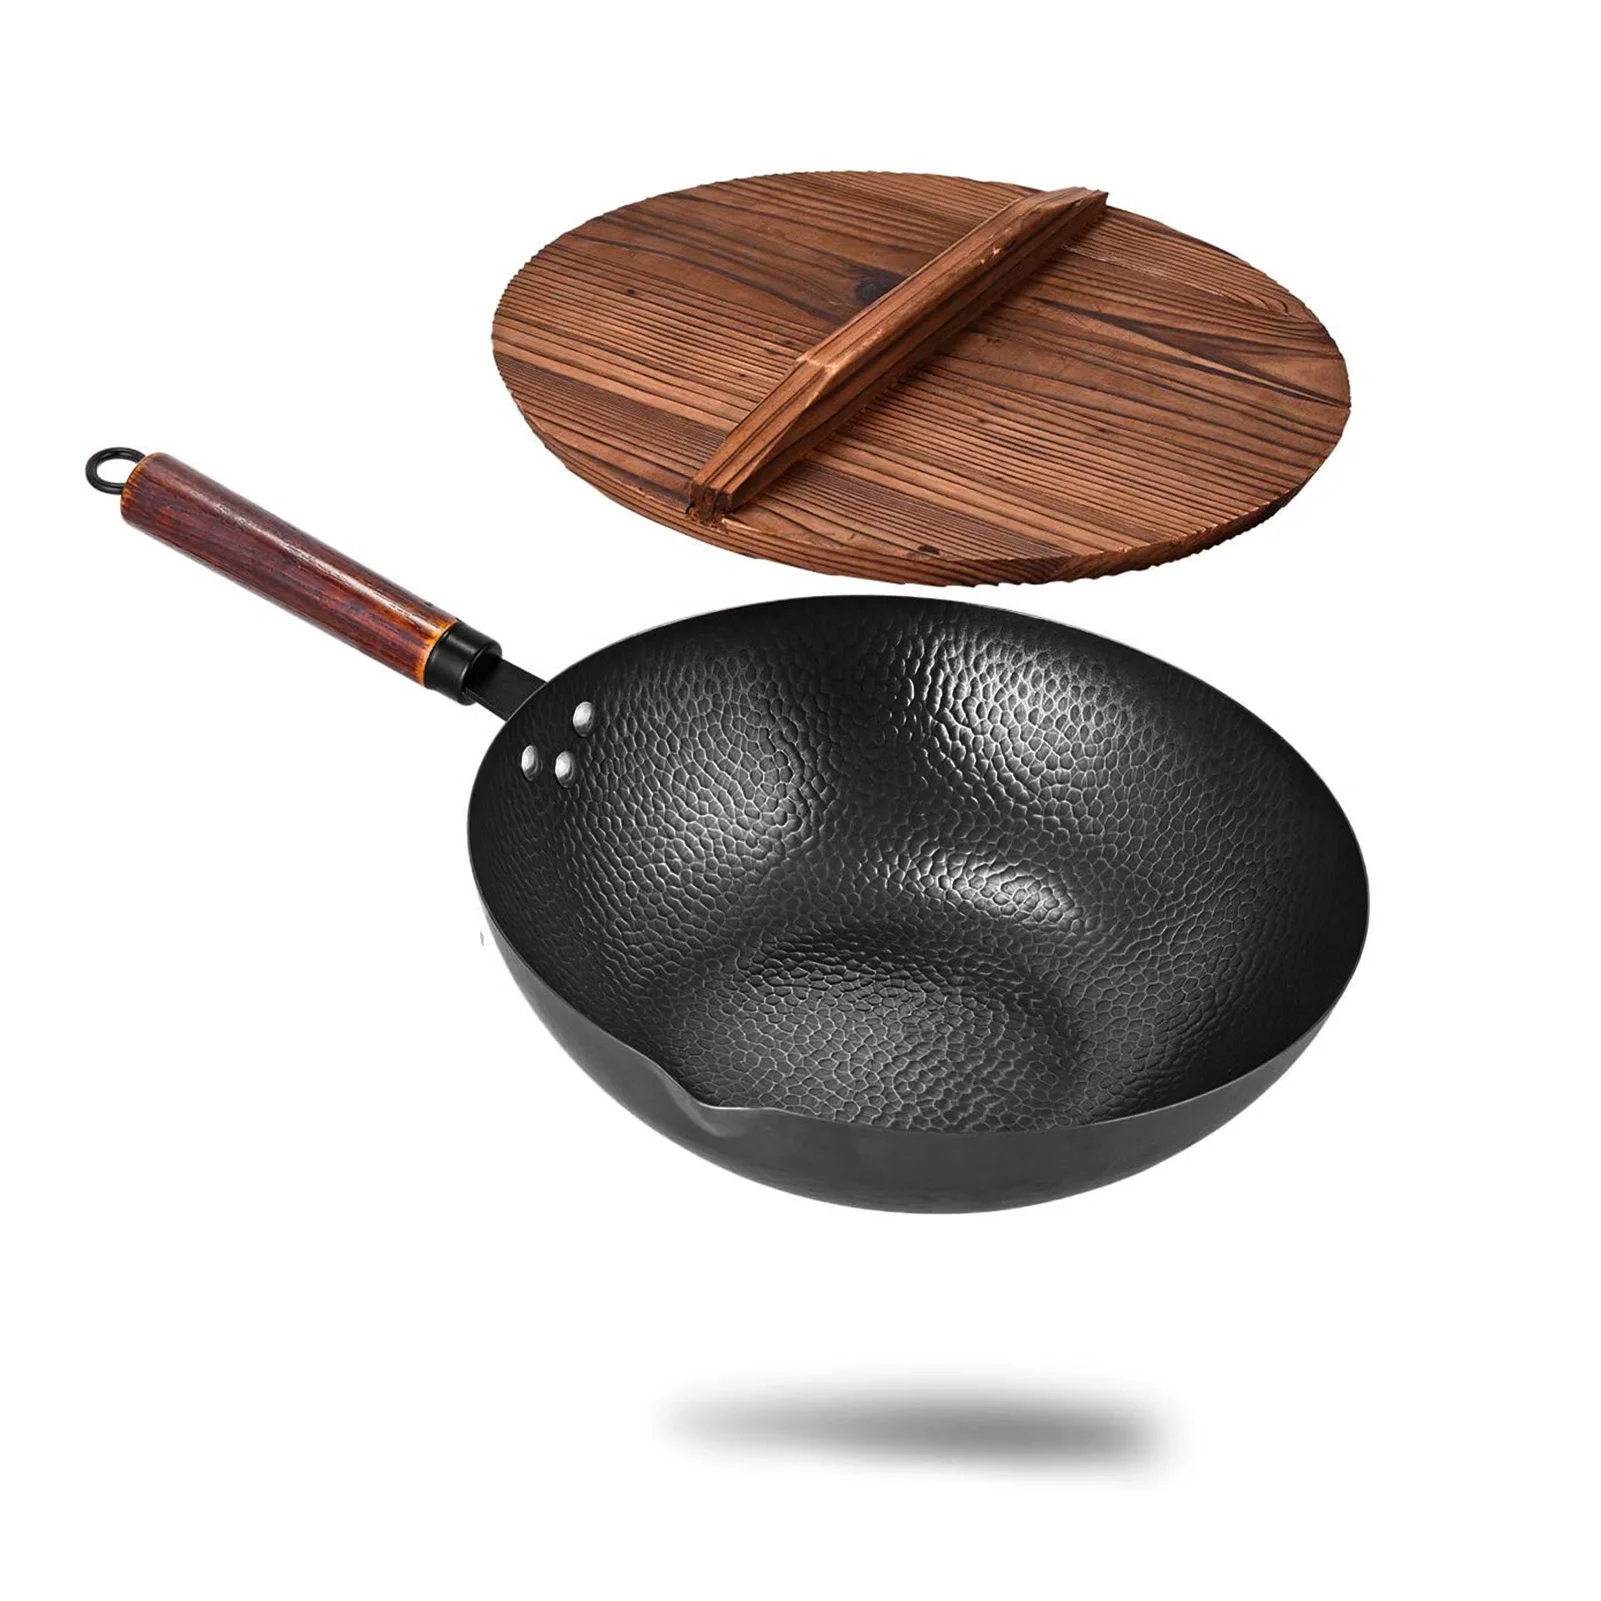 Non-stick Pan Kitchen Set Handmade Wok Traditional Forged Uncoated Carbon Steel Wok Pan With Wooden Handle Stir Fry Pan With Lid